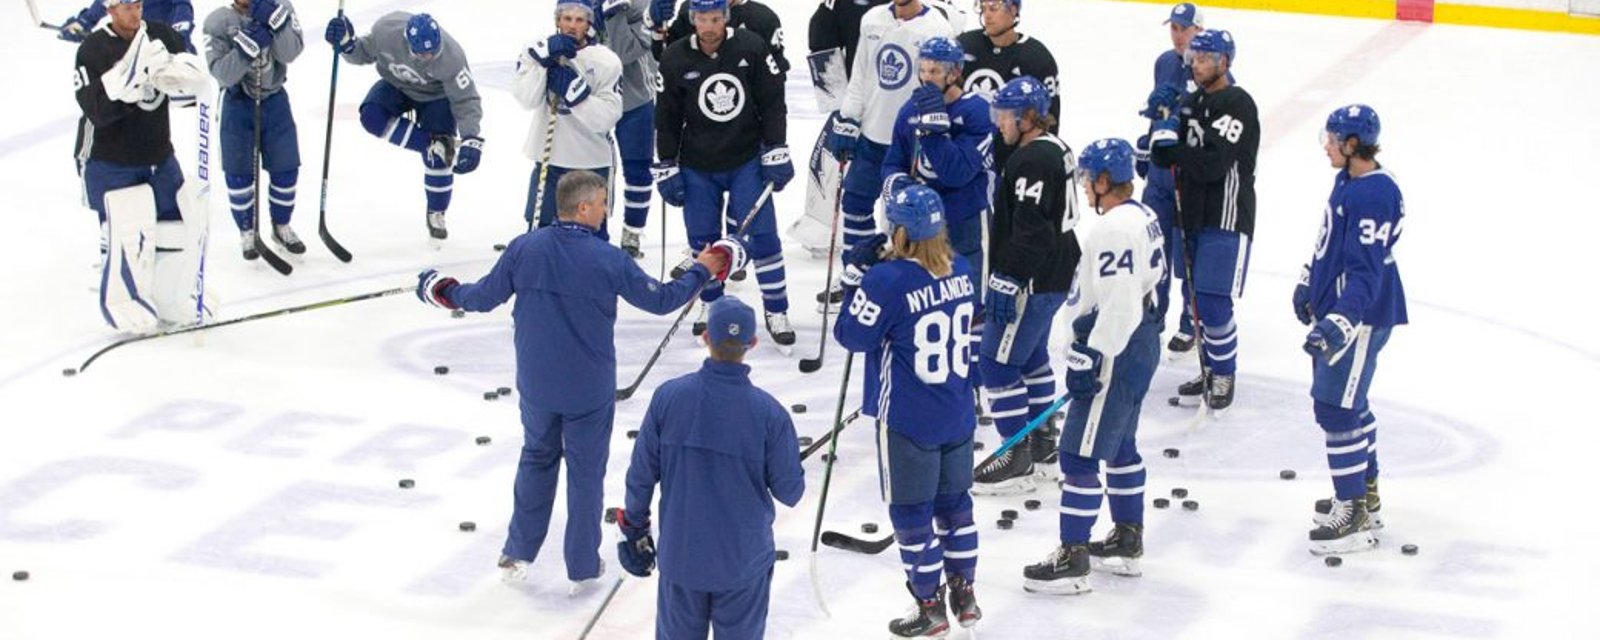 Another casualty at the Maple Leafs’ training camp!